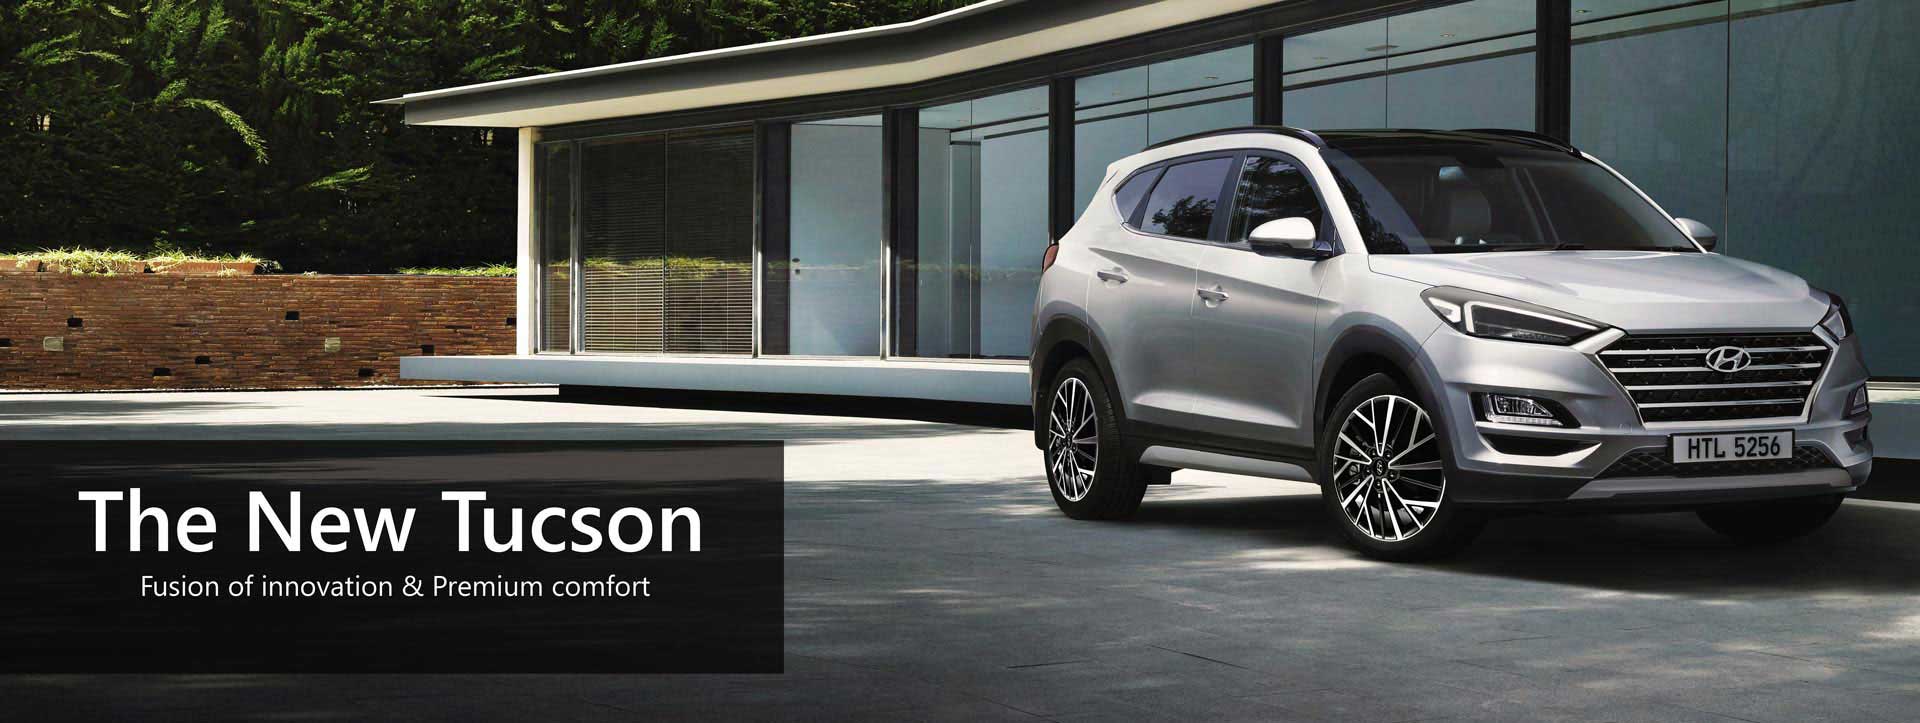 The All New Tucson Now in Pakistan